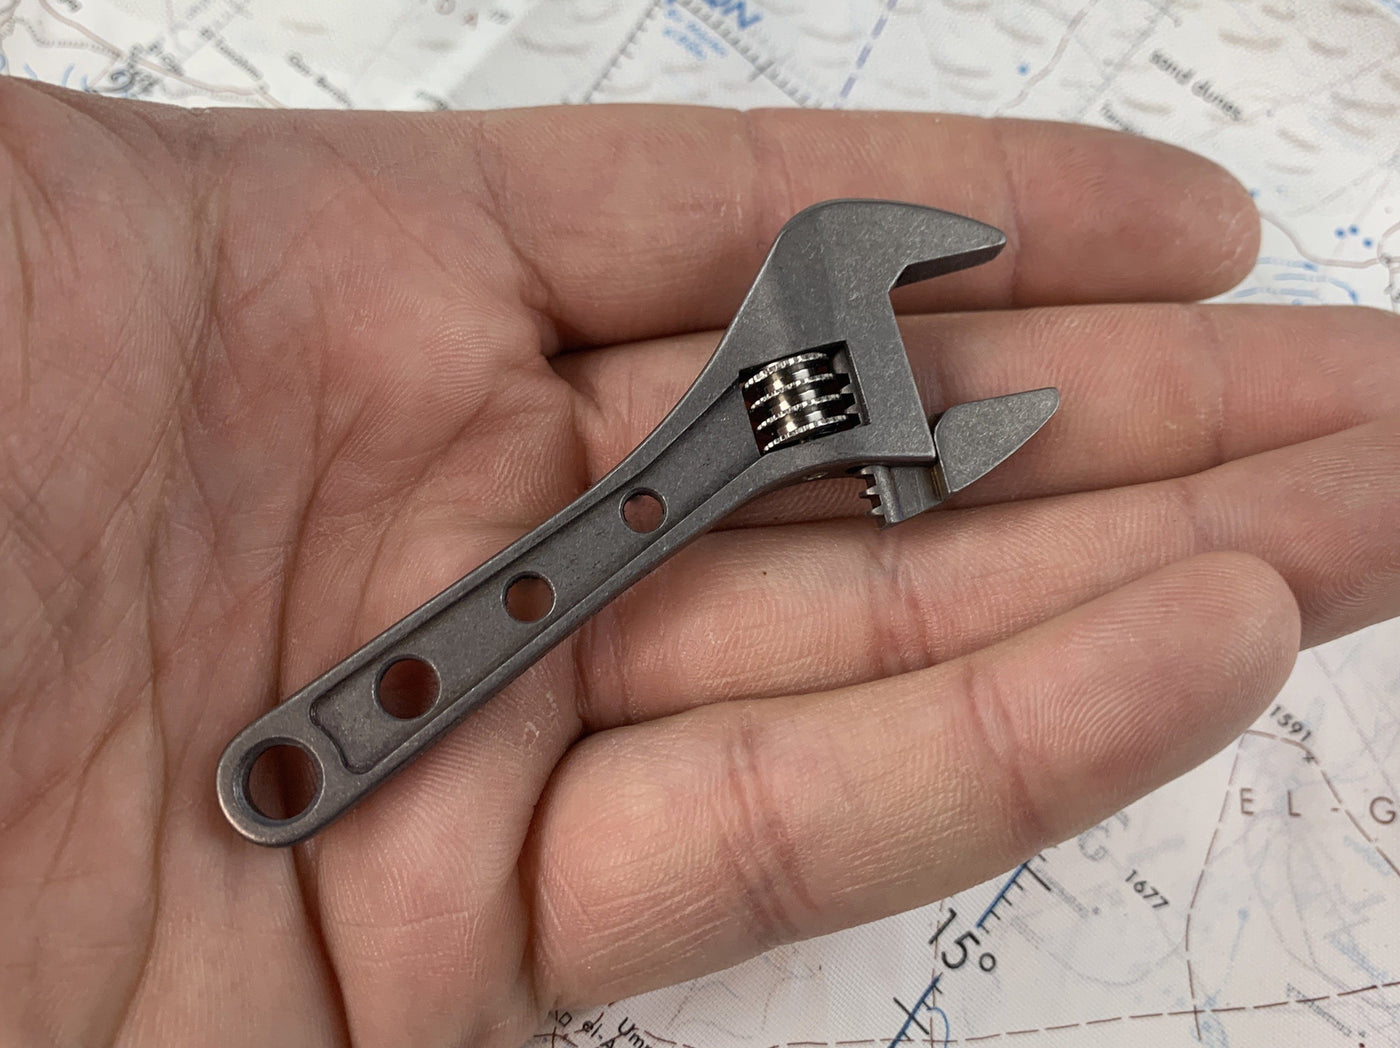 Small Adjustable Wrench - Titanium 3 Inch ( NSN Pending ) - CountyComm